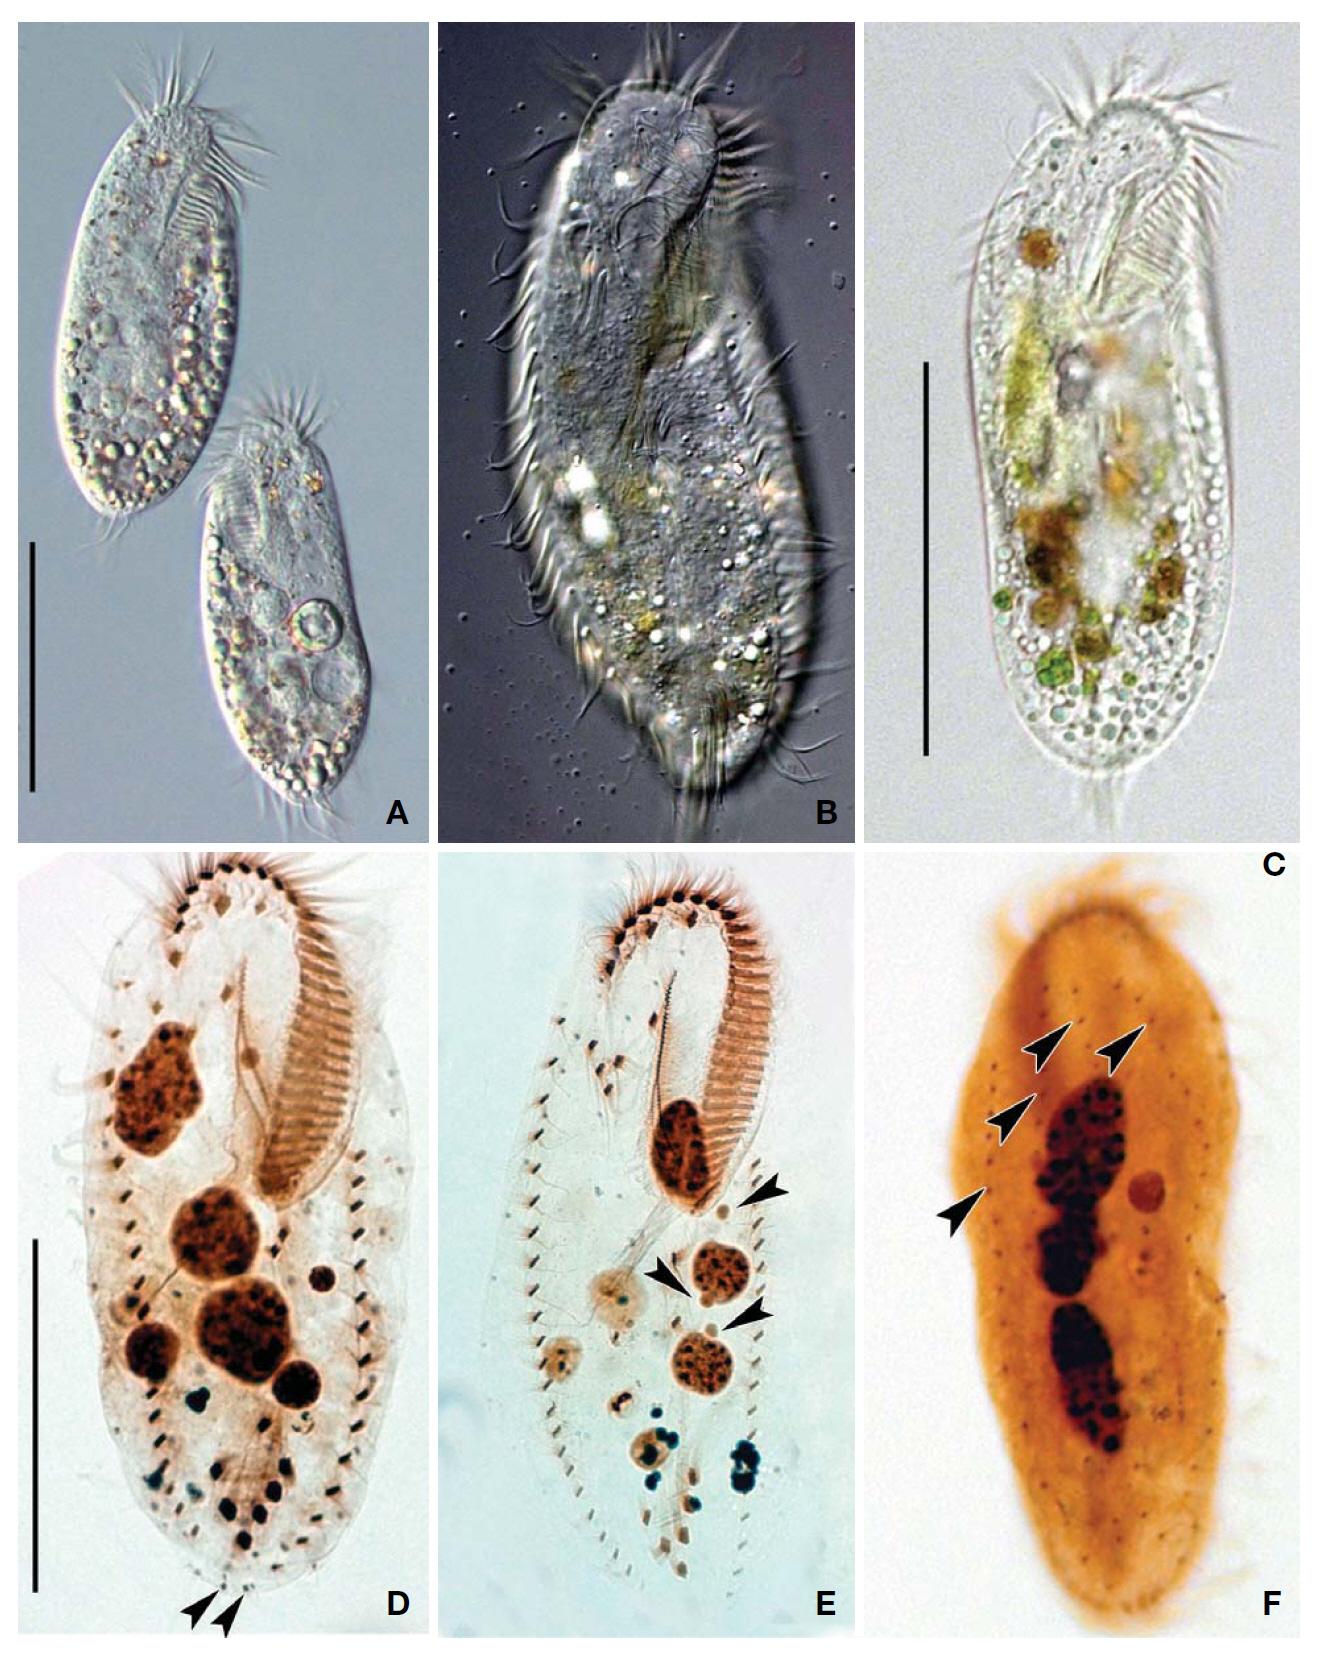 Photomicrographs of Sterkiella thompsoni from live (A-C) and impregnated specimens (D-F). A Ventral view of a typical individual using differential interference contrast microscopy; B Somatic ciliature on the ventral side; C Cytoplasm with many food vacuoles; D Ventral views showing infraciliature and caudal cirri (arrowheads); E Ventral views showing the infraciliature and nuclear apparatus. Arrowheads denote micronuclei; F Dorsal kineties (arrowhead). Scale bars=100 ㎛.